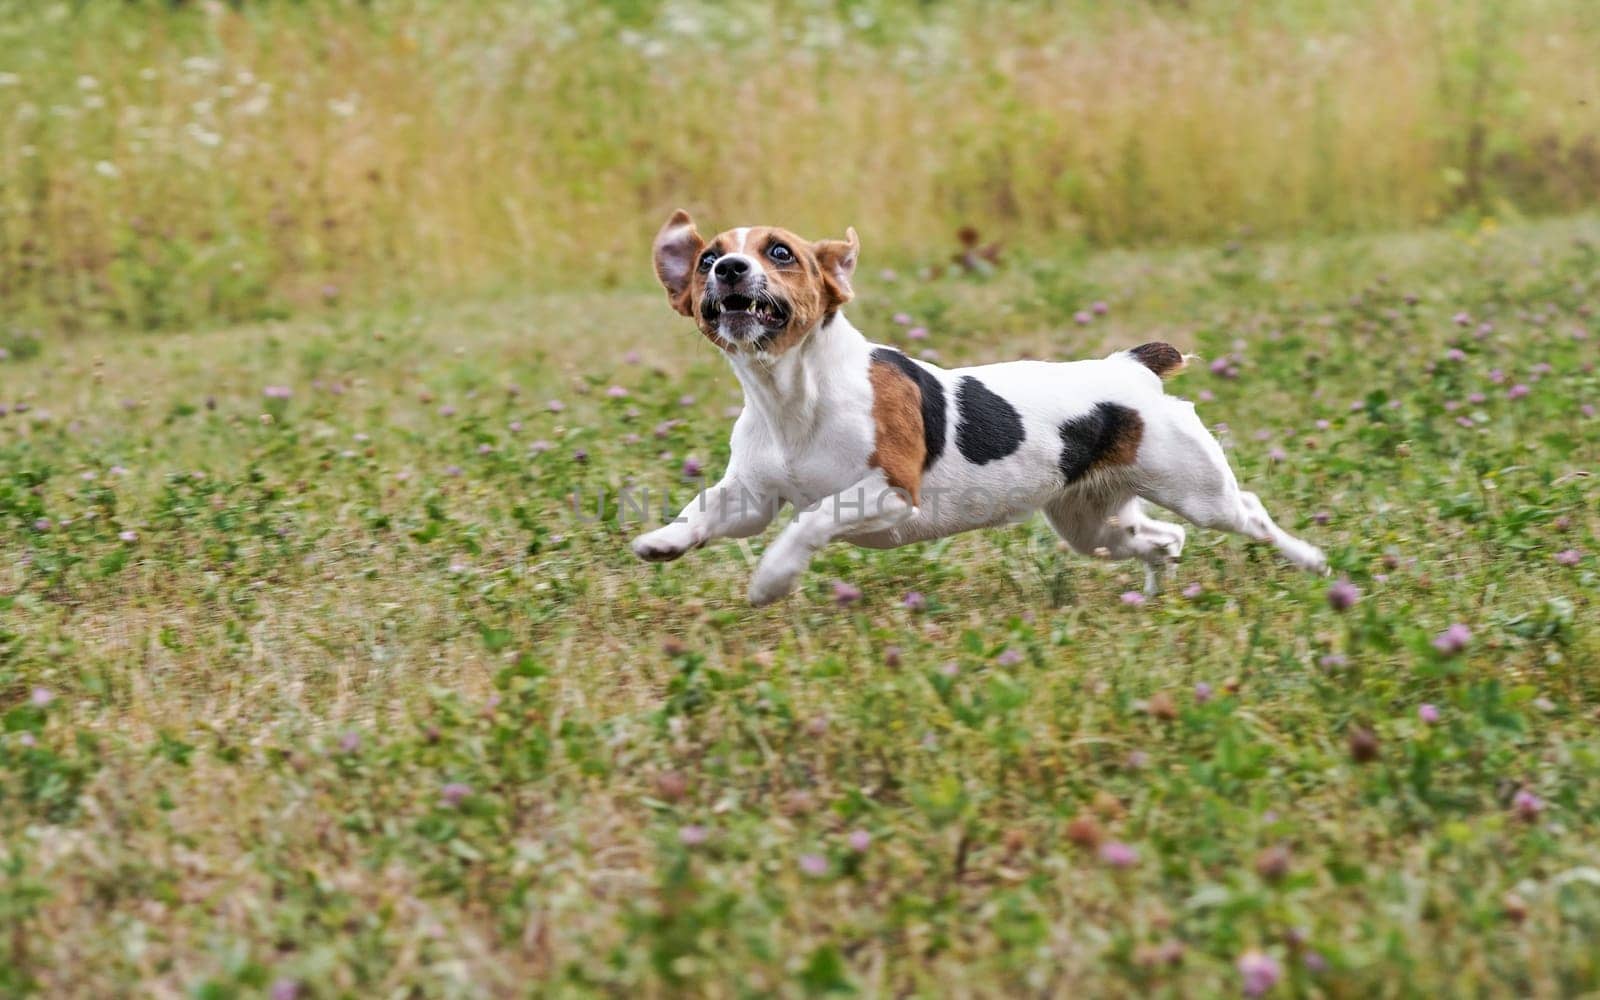 Jack Russell terrier running fast on grass meadow, mouth open, head looking up at the ball thrown to her by Ivanko